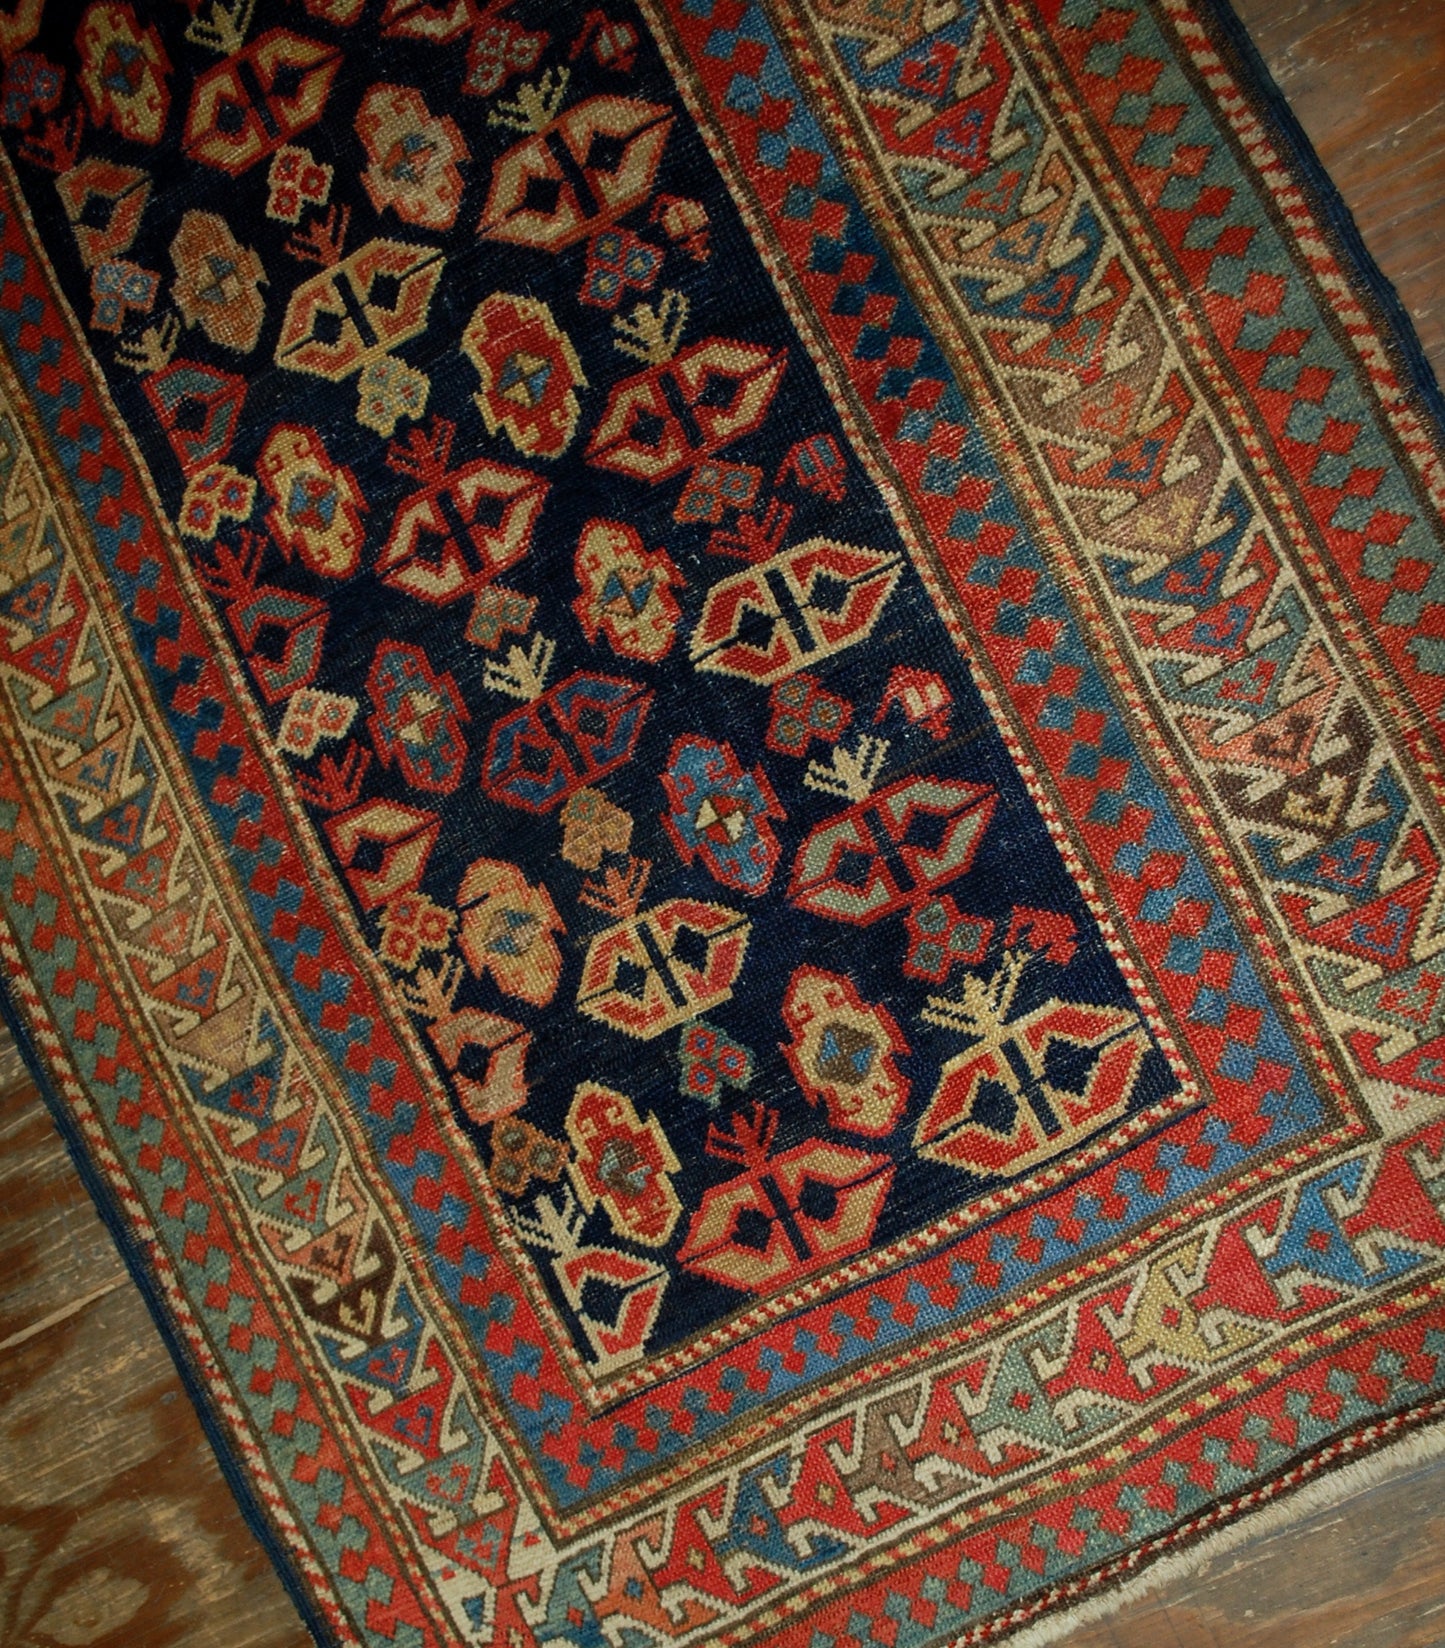 Antique handmade Caucasian Gendje rug in good condition. The rug has dark blue field covered in tribal figures, made in the end of 19th century.